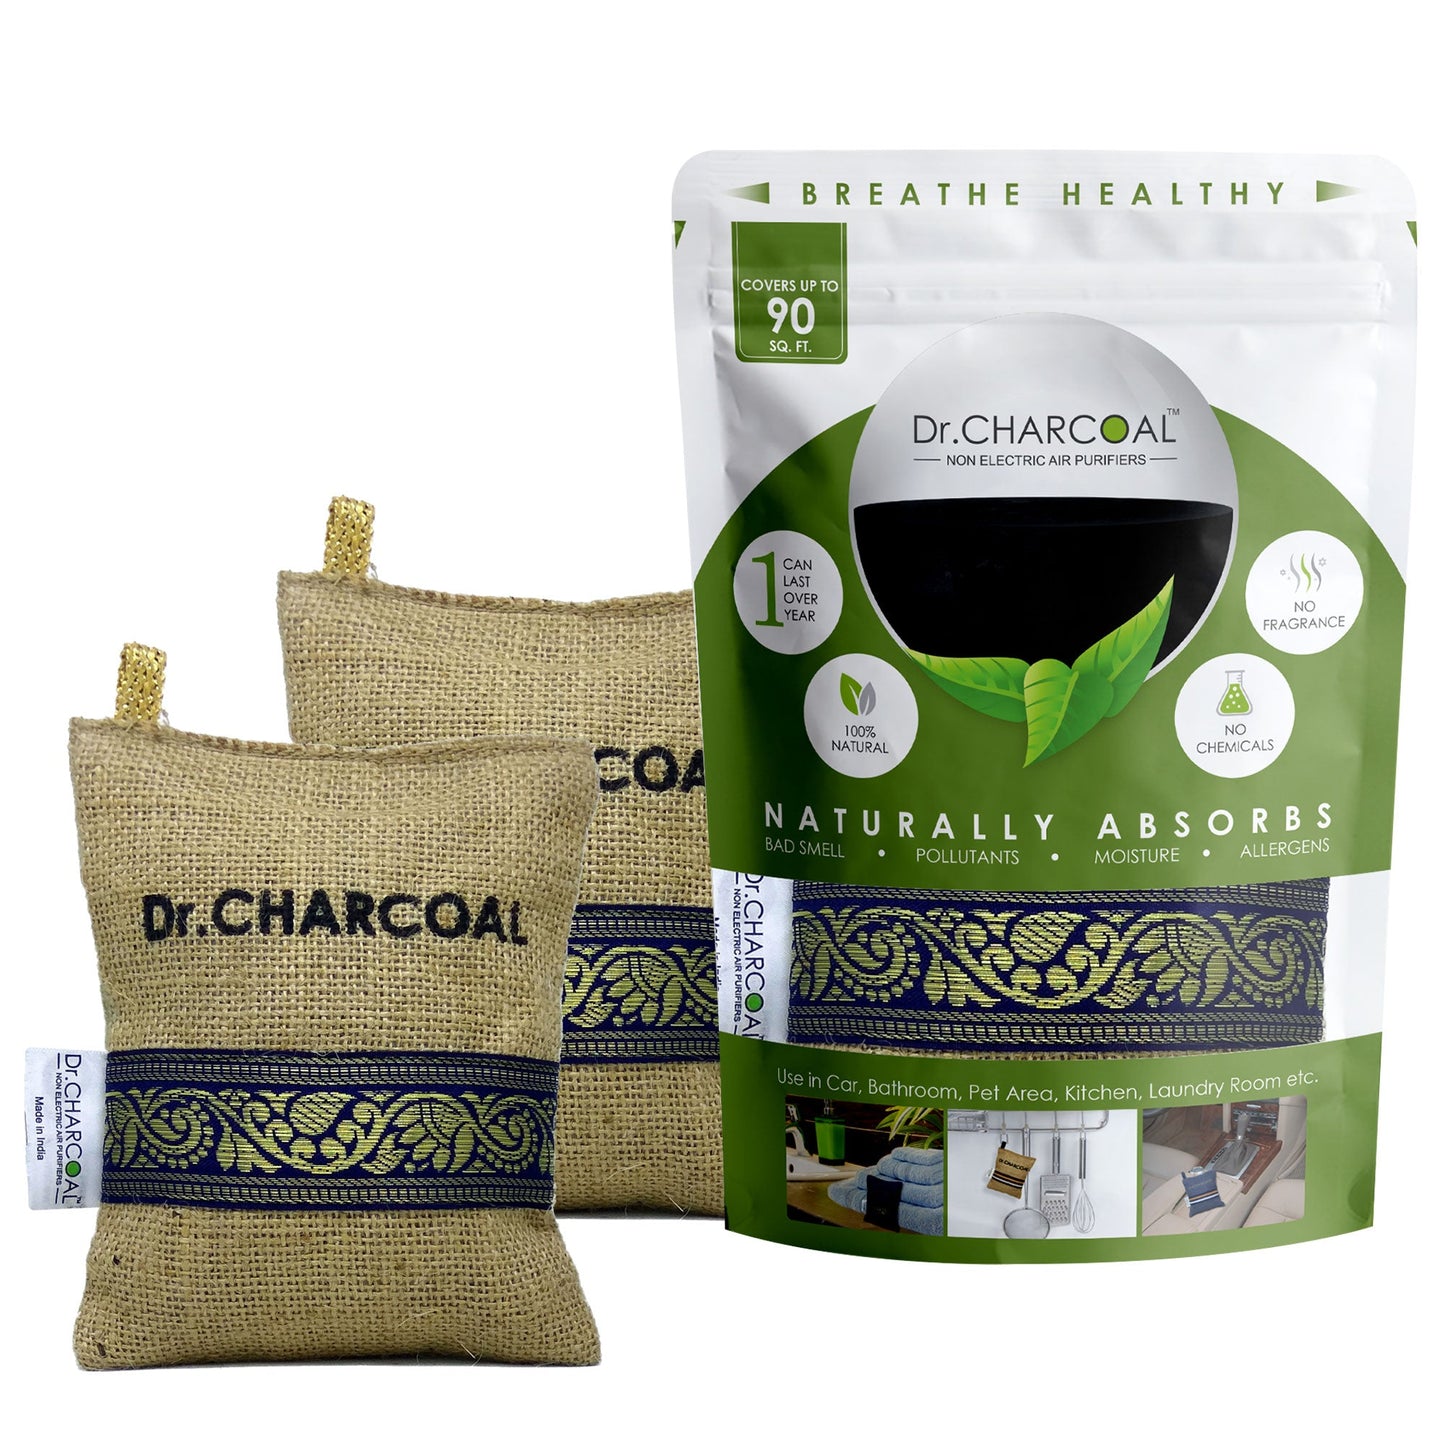 Dr Charcoal for Bathroom - Removes Bad Smell and Moisture